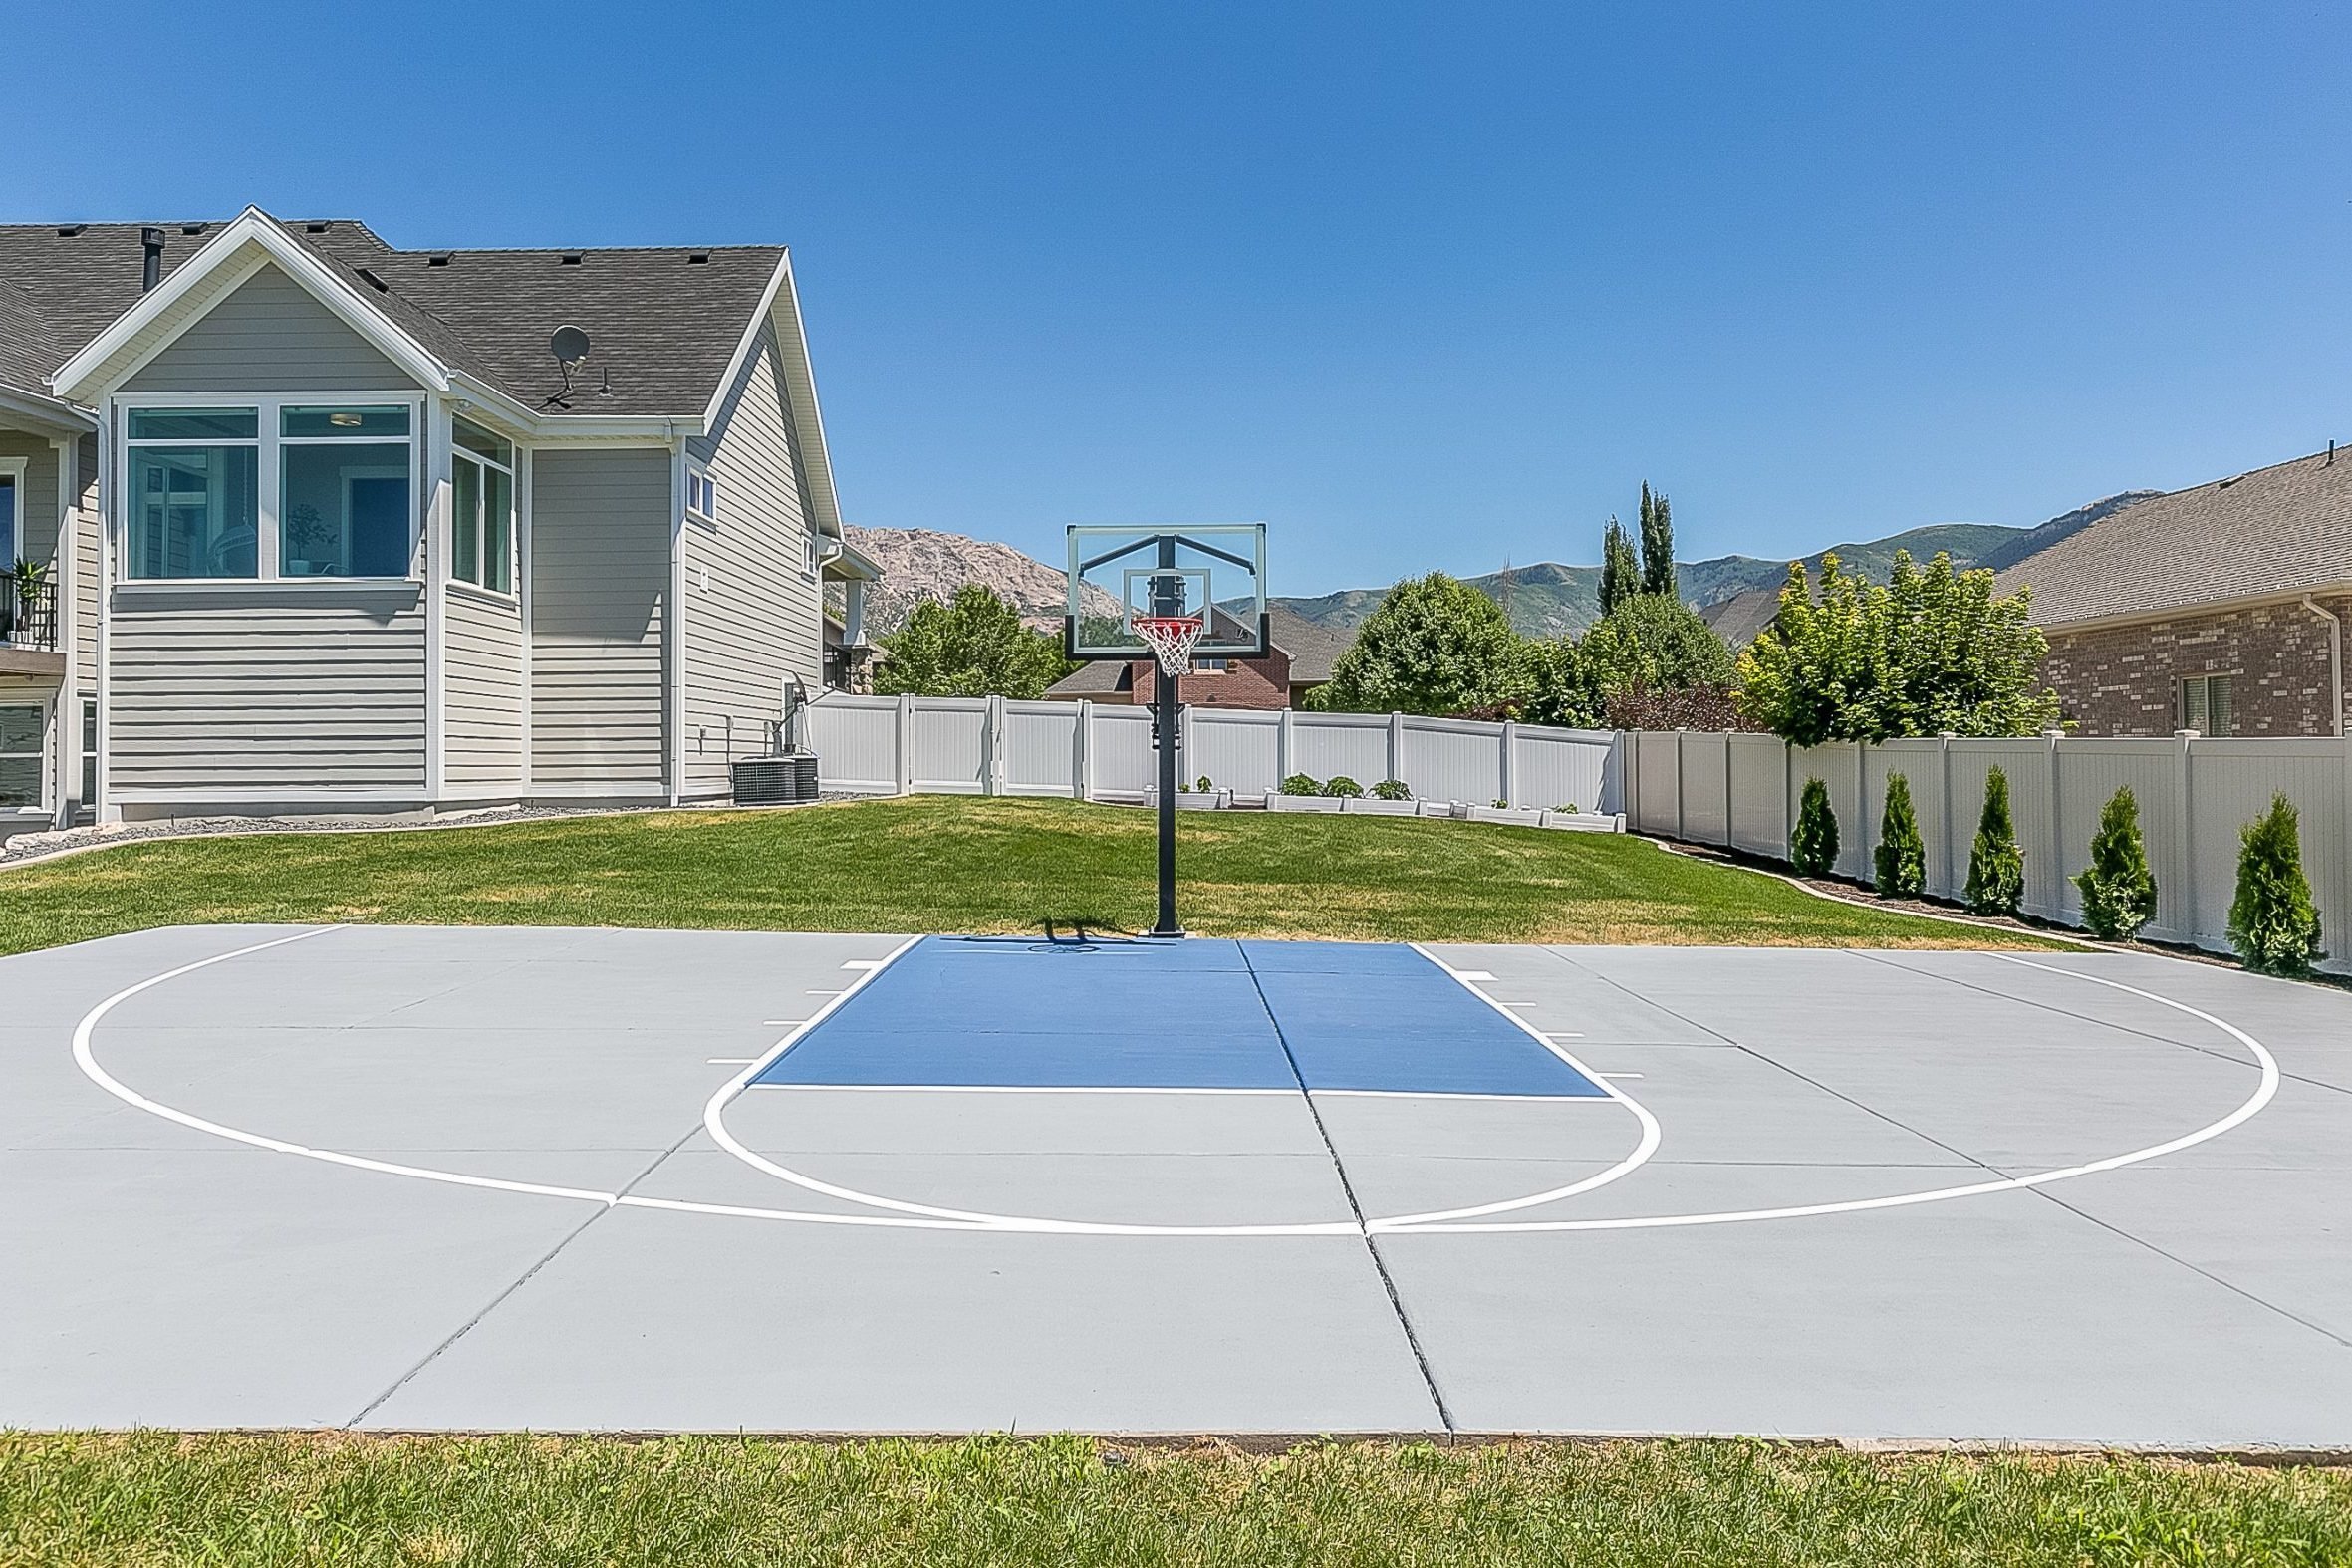 indoor basketball court in a house